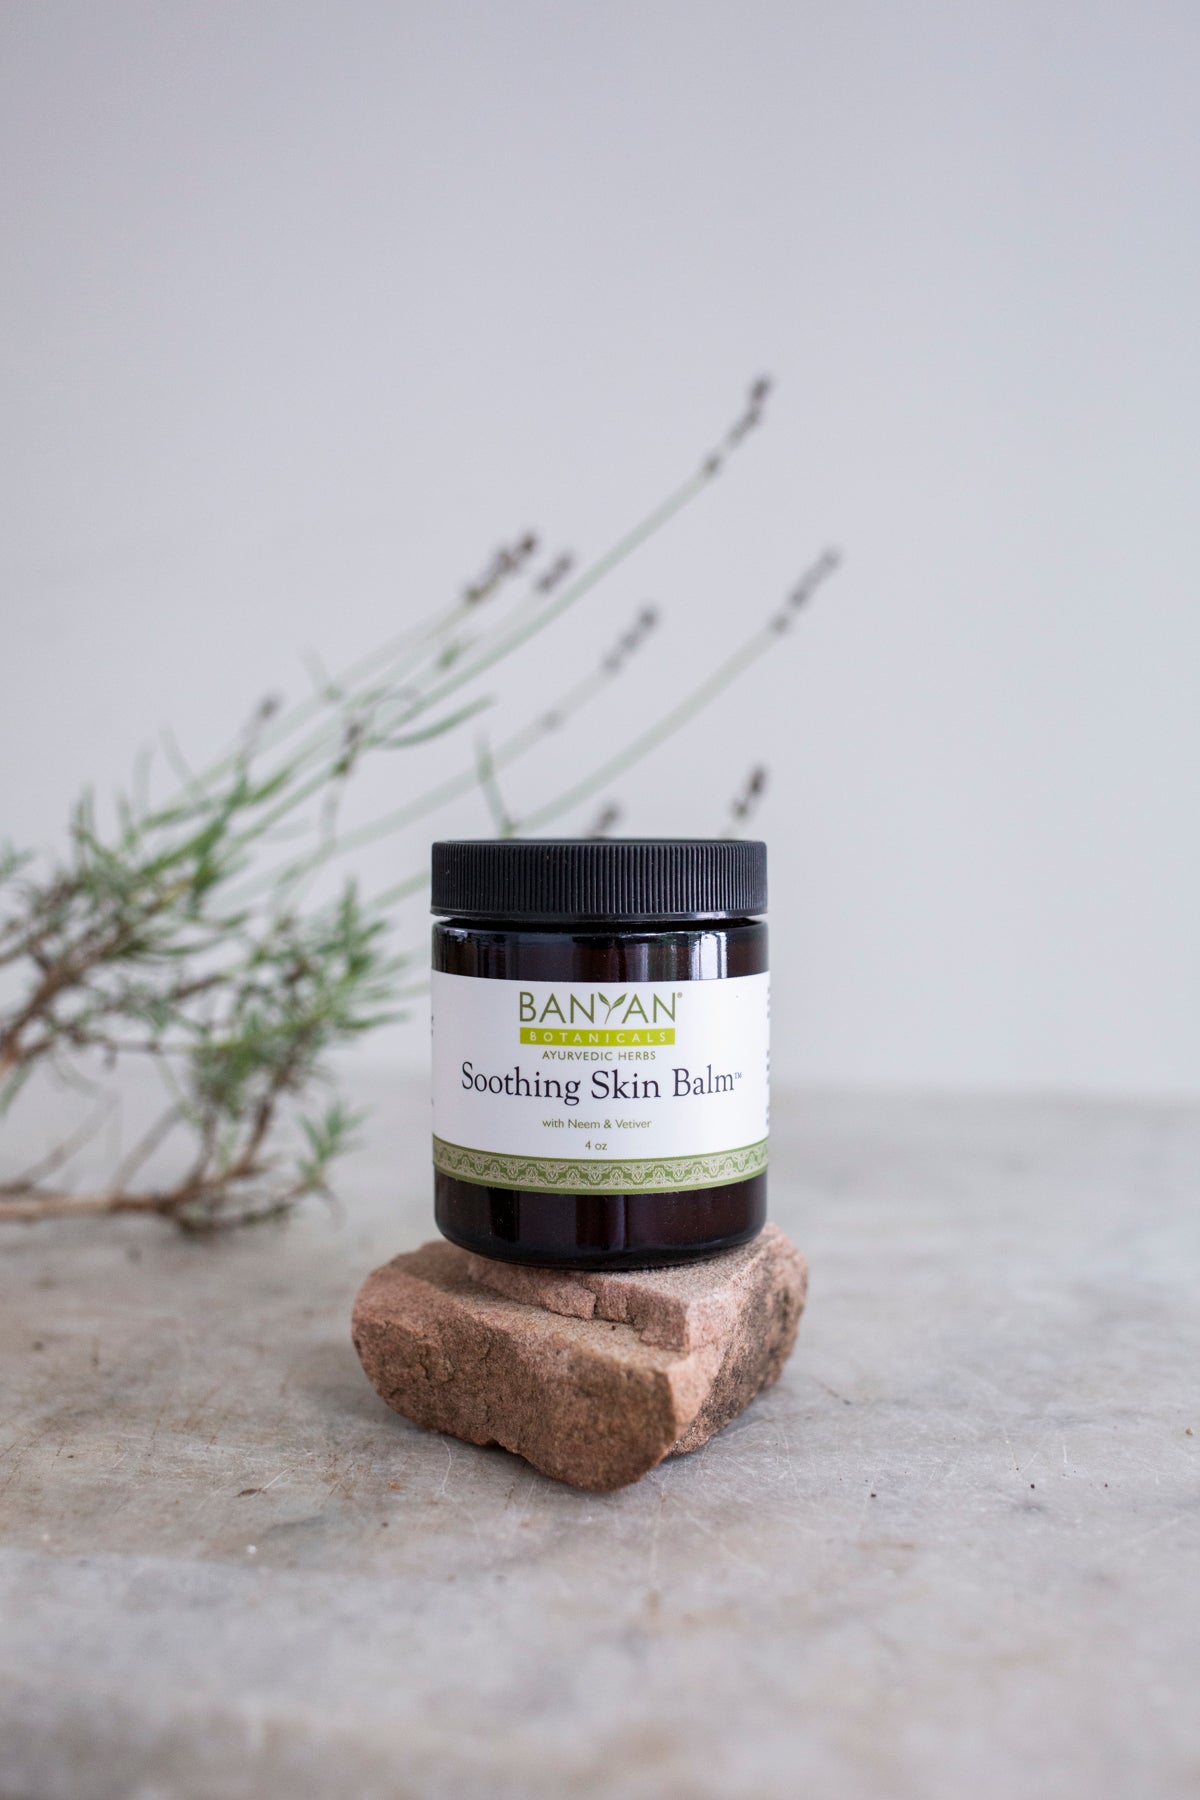 Banyan Botanicals Soothing Skin Balm with neem and vetiver